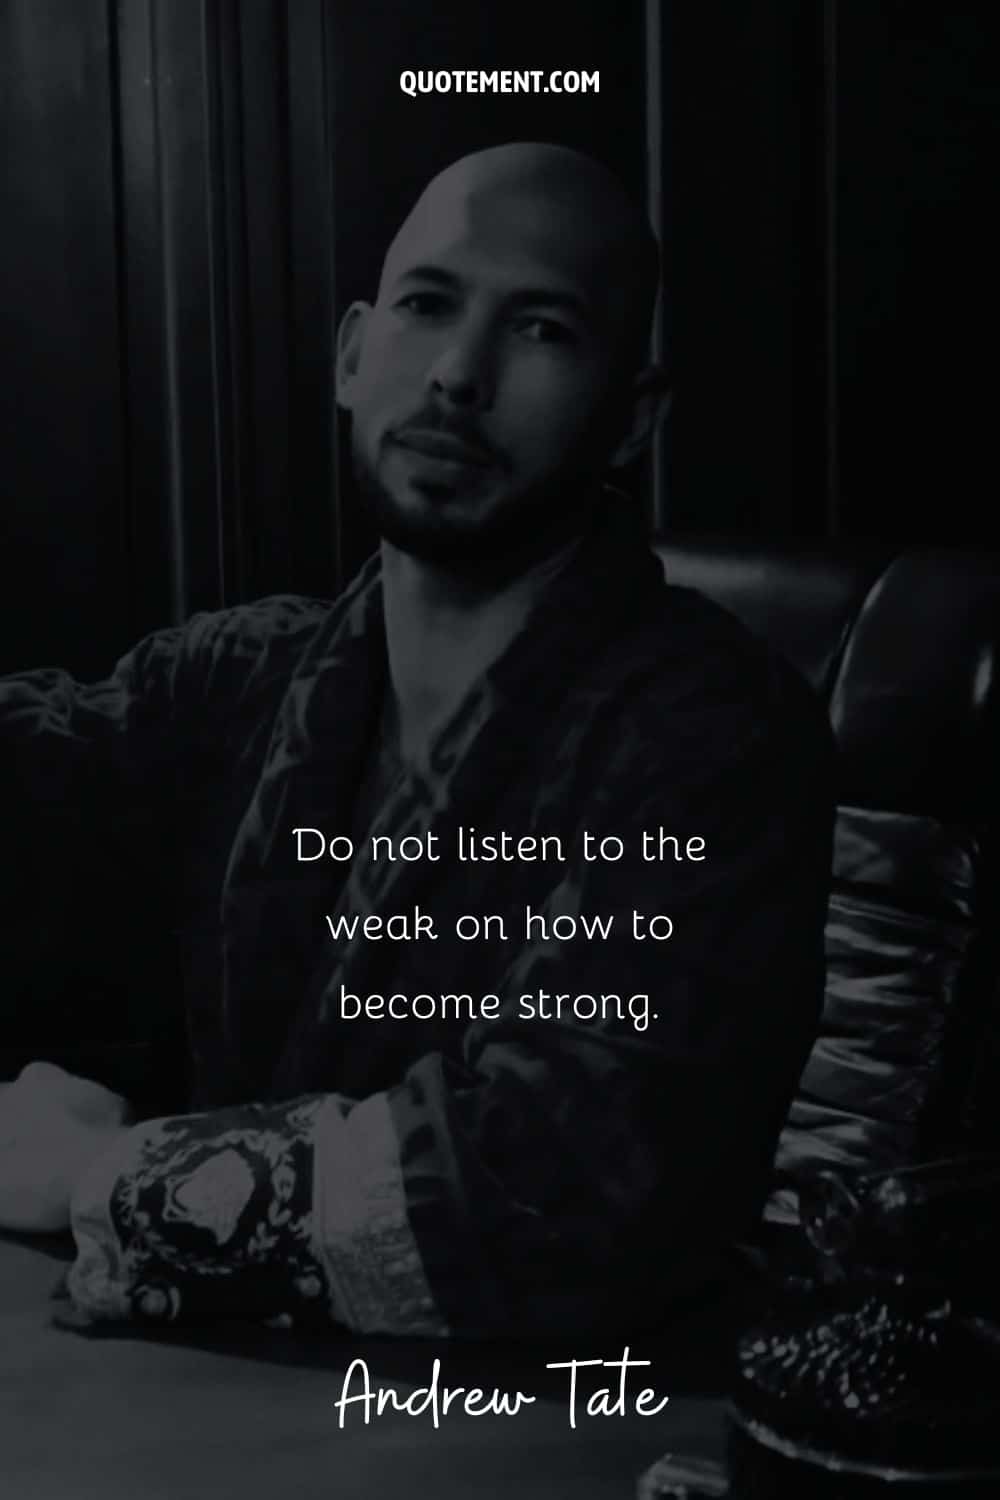 Do not listen to the weak on how to become strong